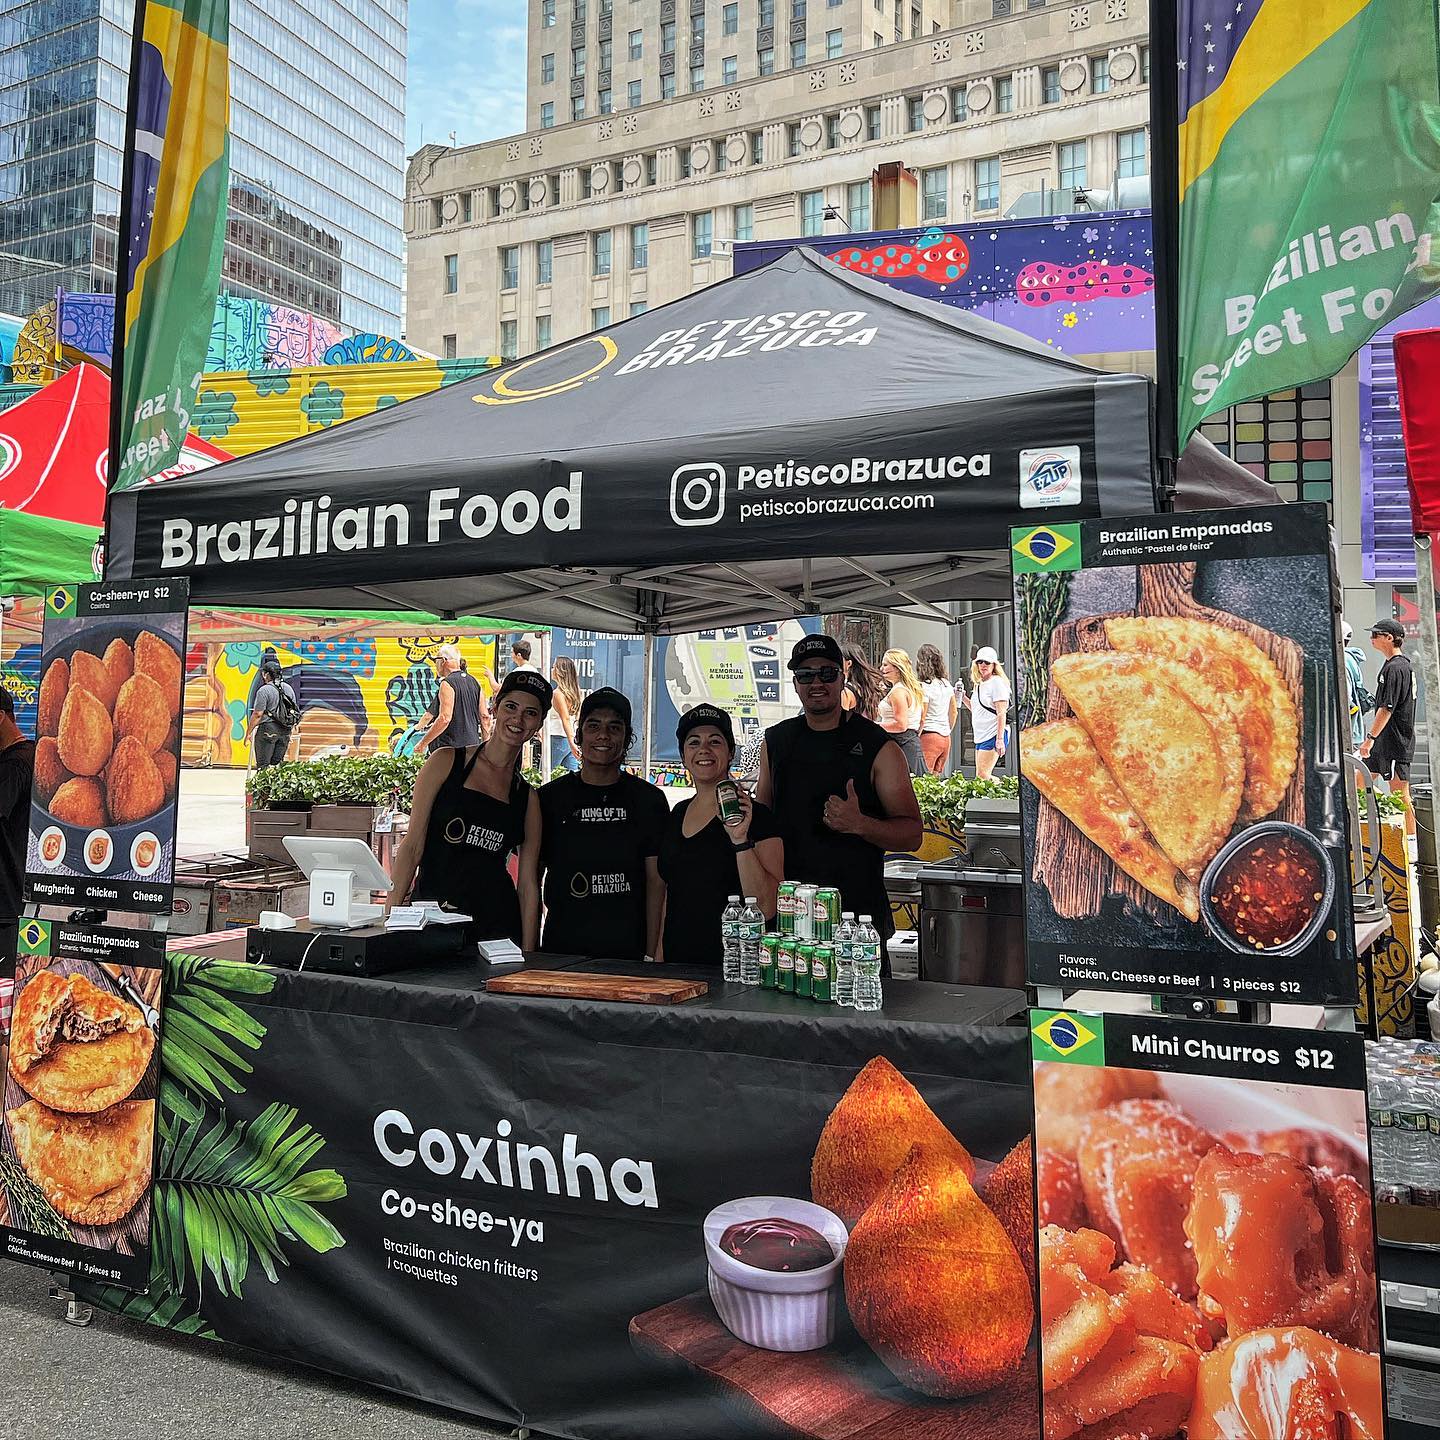 The New York’s favorite coxinha now available at @_wtcofficial 🇧🇷🇺🇸
.
.
.
.
#smorgasburg #petiscobrazuca #coxinha #brazilianfood #brazilian #love #food